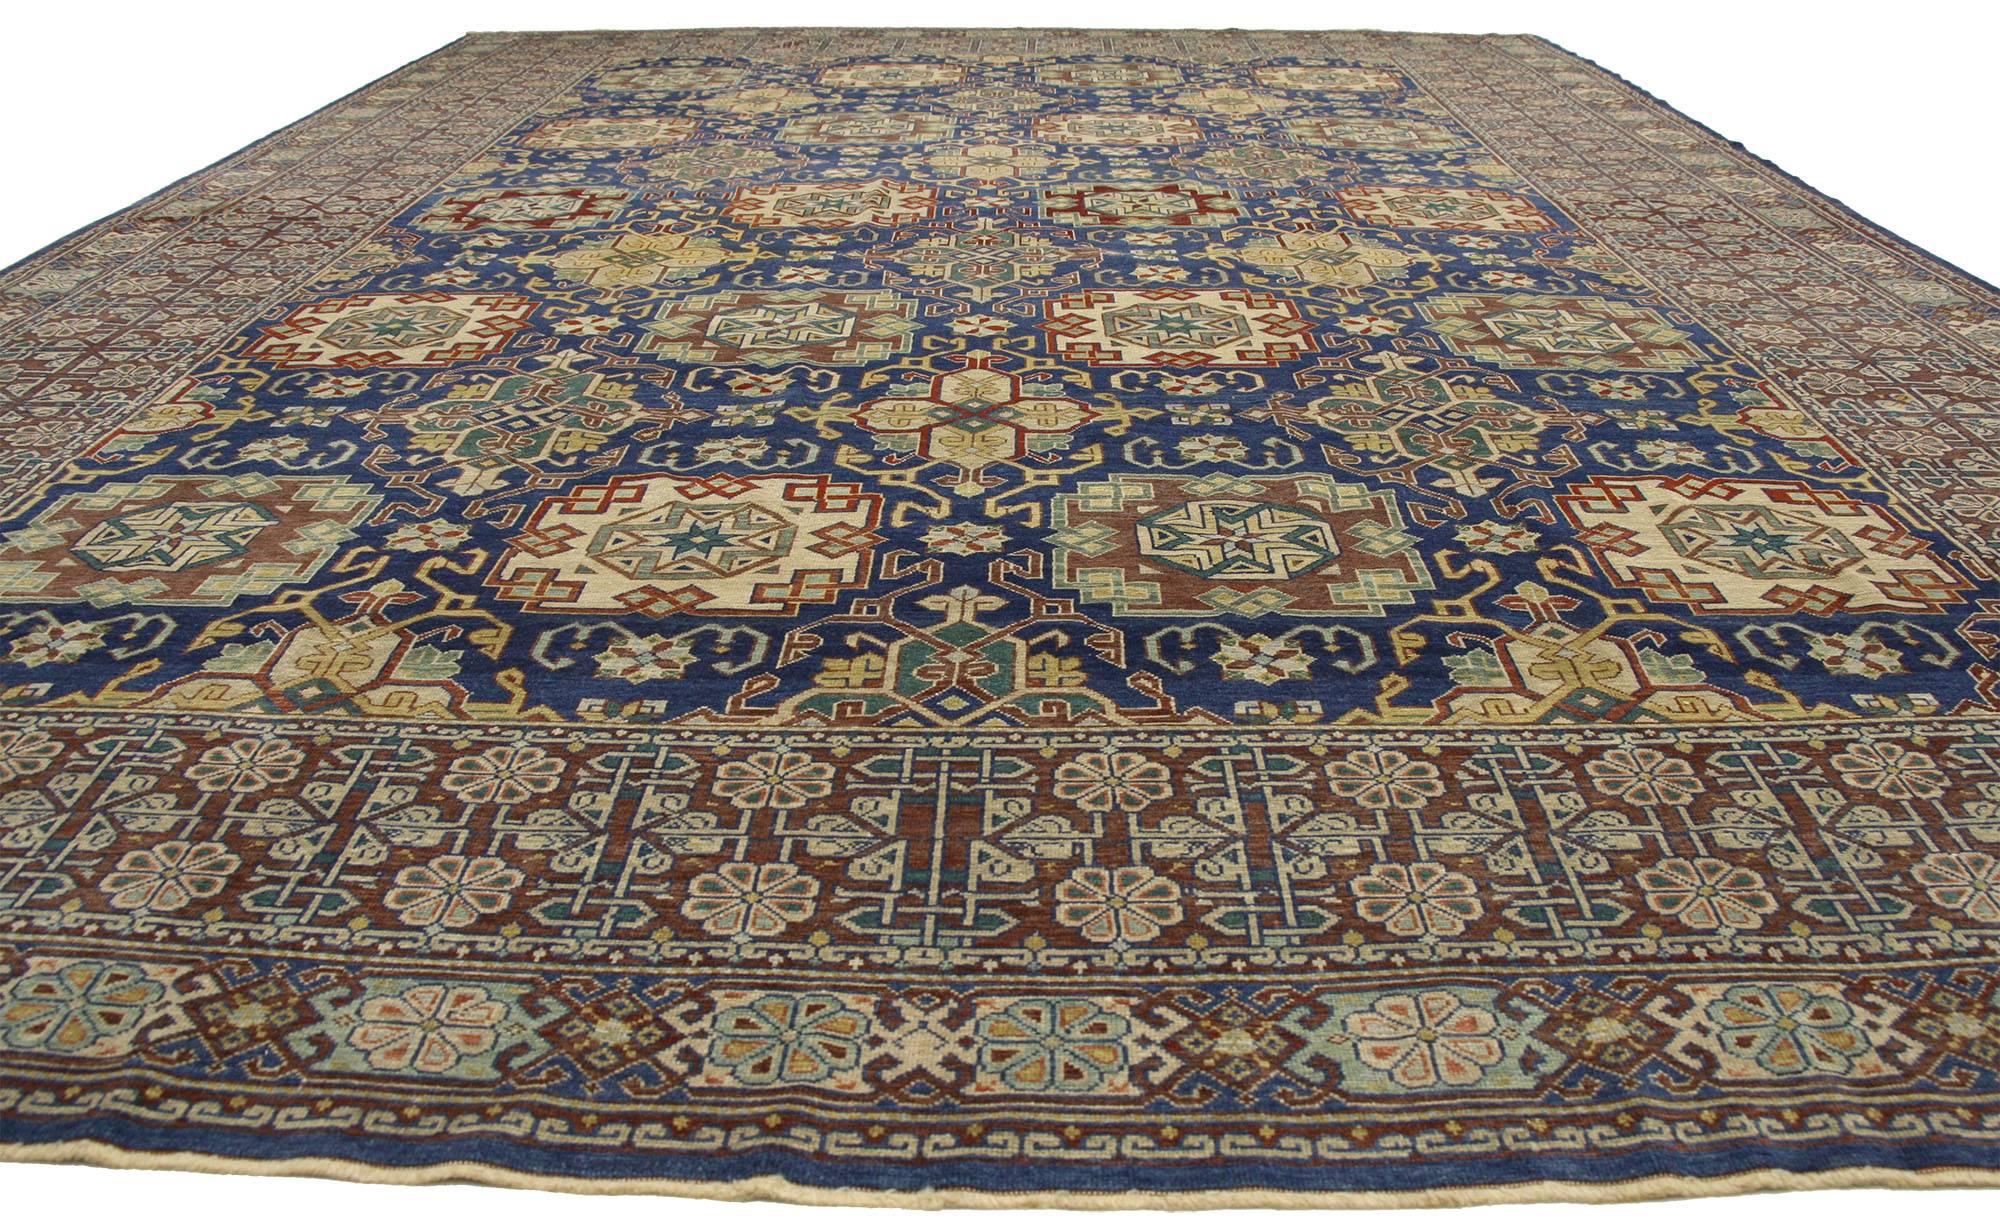 77122, vintage Turkish Oushak rug with modern Luxe style and bold Art Deco design. Combining hard angles, a bold geometric pattern, and symmetry, this hand-knotted wool vintage Turkish Oushak rug embodies true Art Deco Period Style. It features